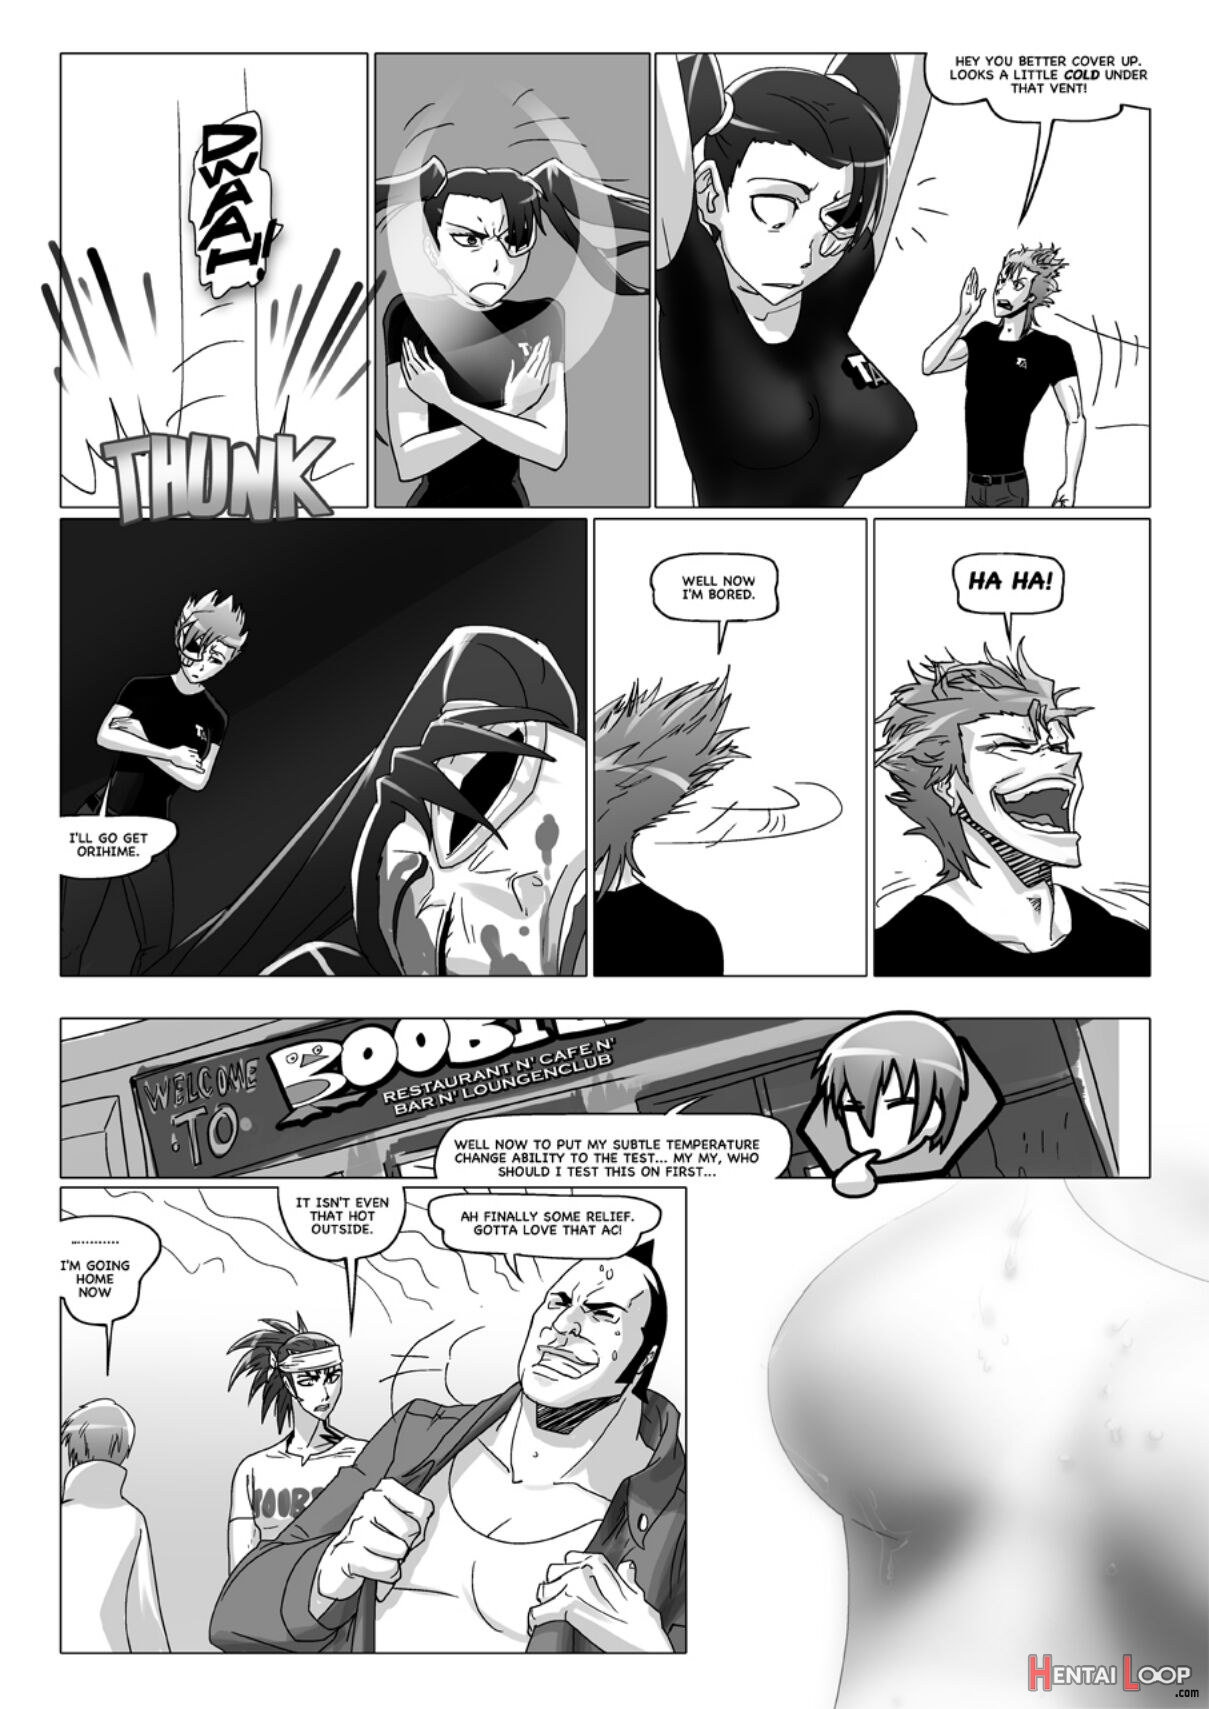 Happy To Serve You - Xxx Version page 216